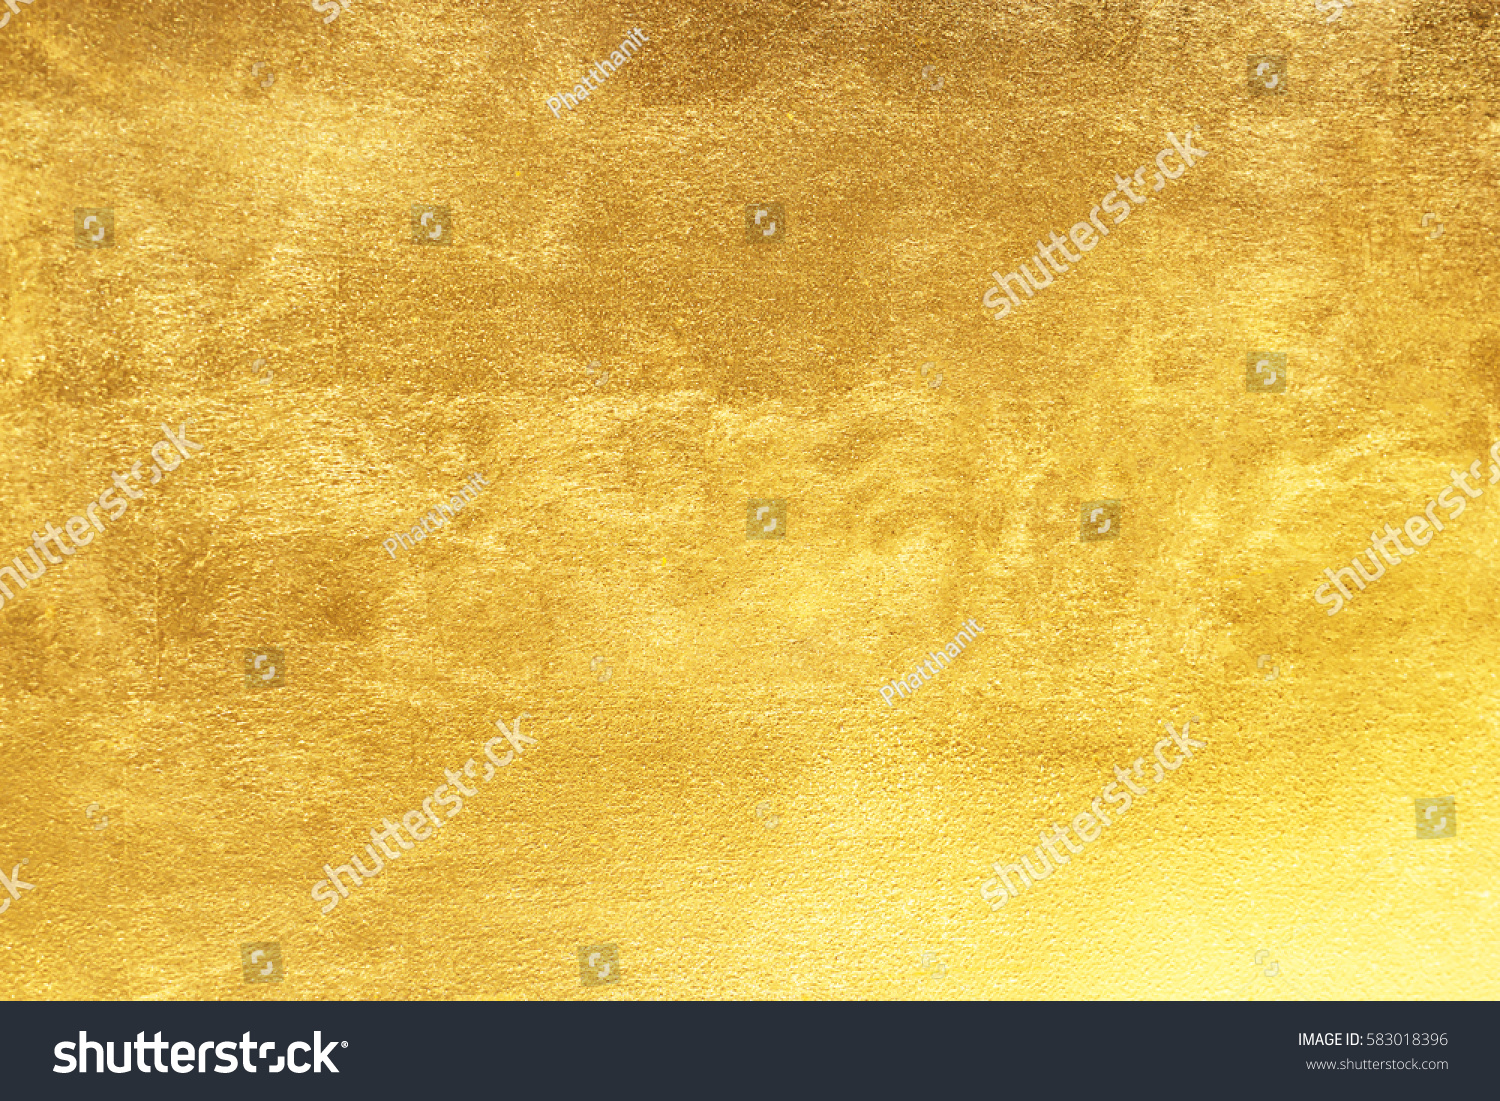 Gold background or texture and gradients shadow #583018396